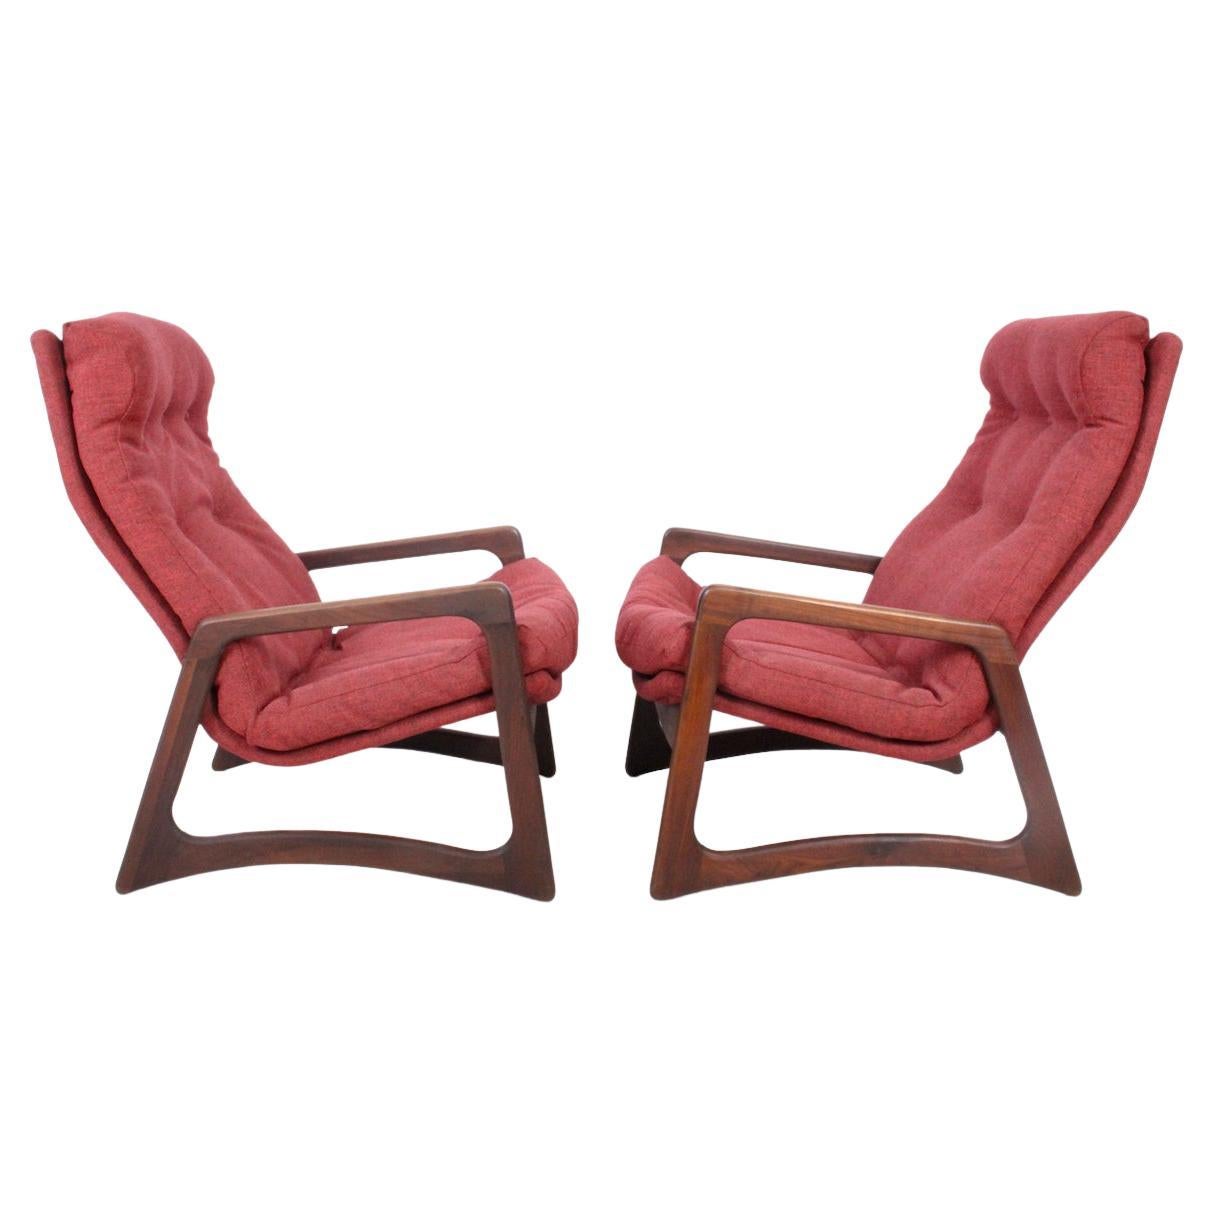 Pair of Adrian Pearsall for Craft Associates Walnut Lounge Chairs, 1960's